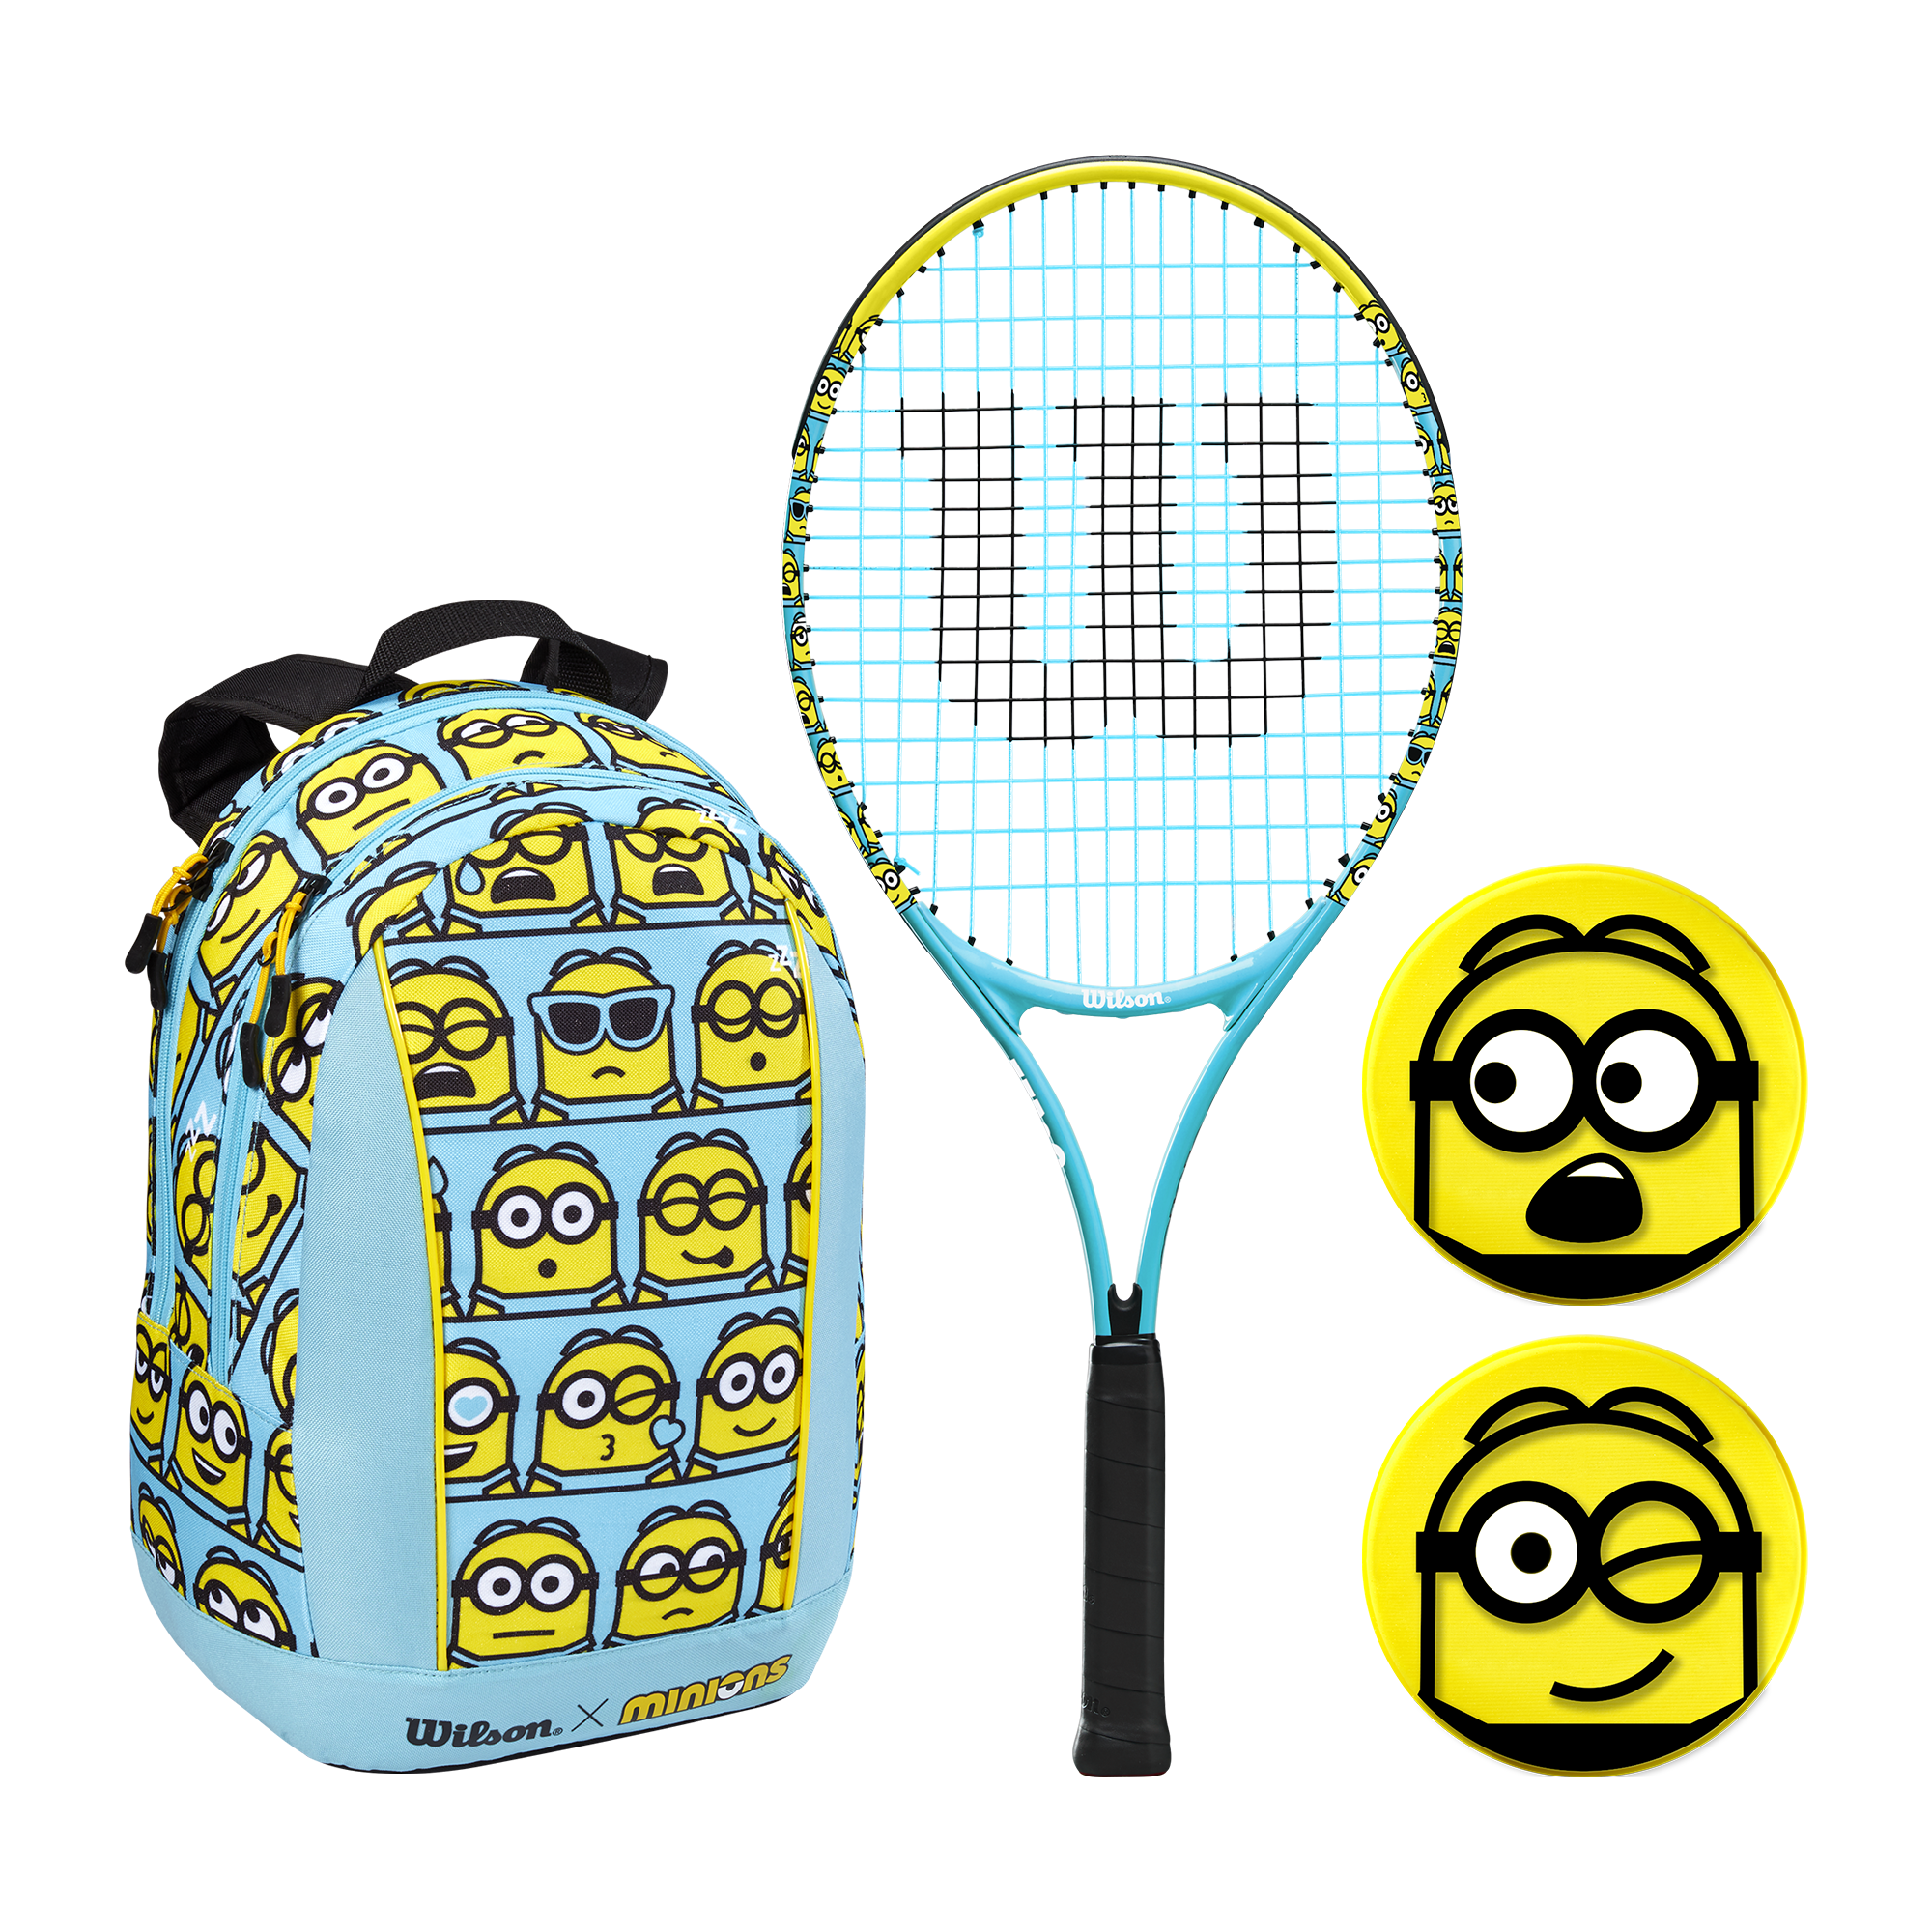 2 Stage 1 WILSON Minions Youth Tennis Balls and 3 